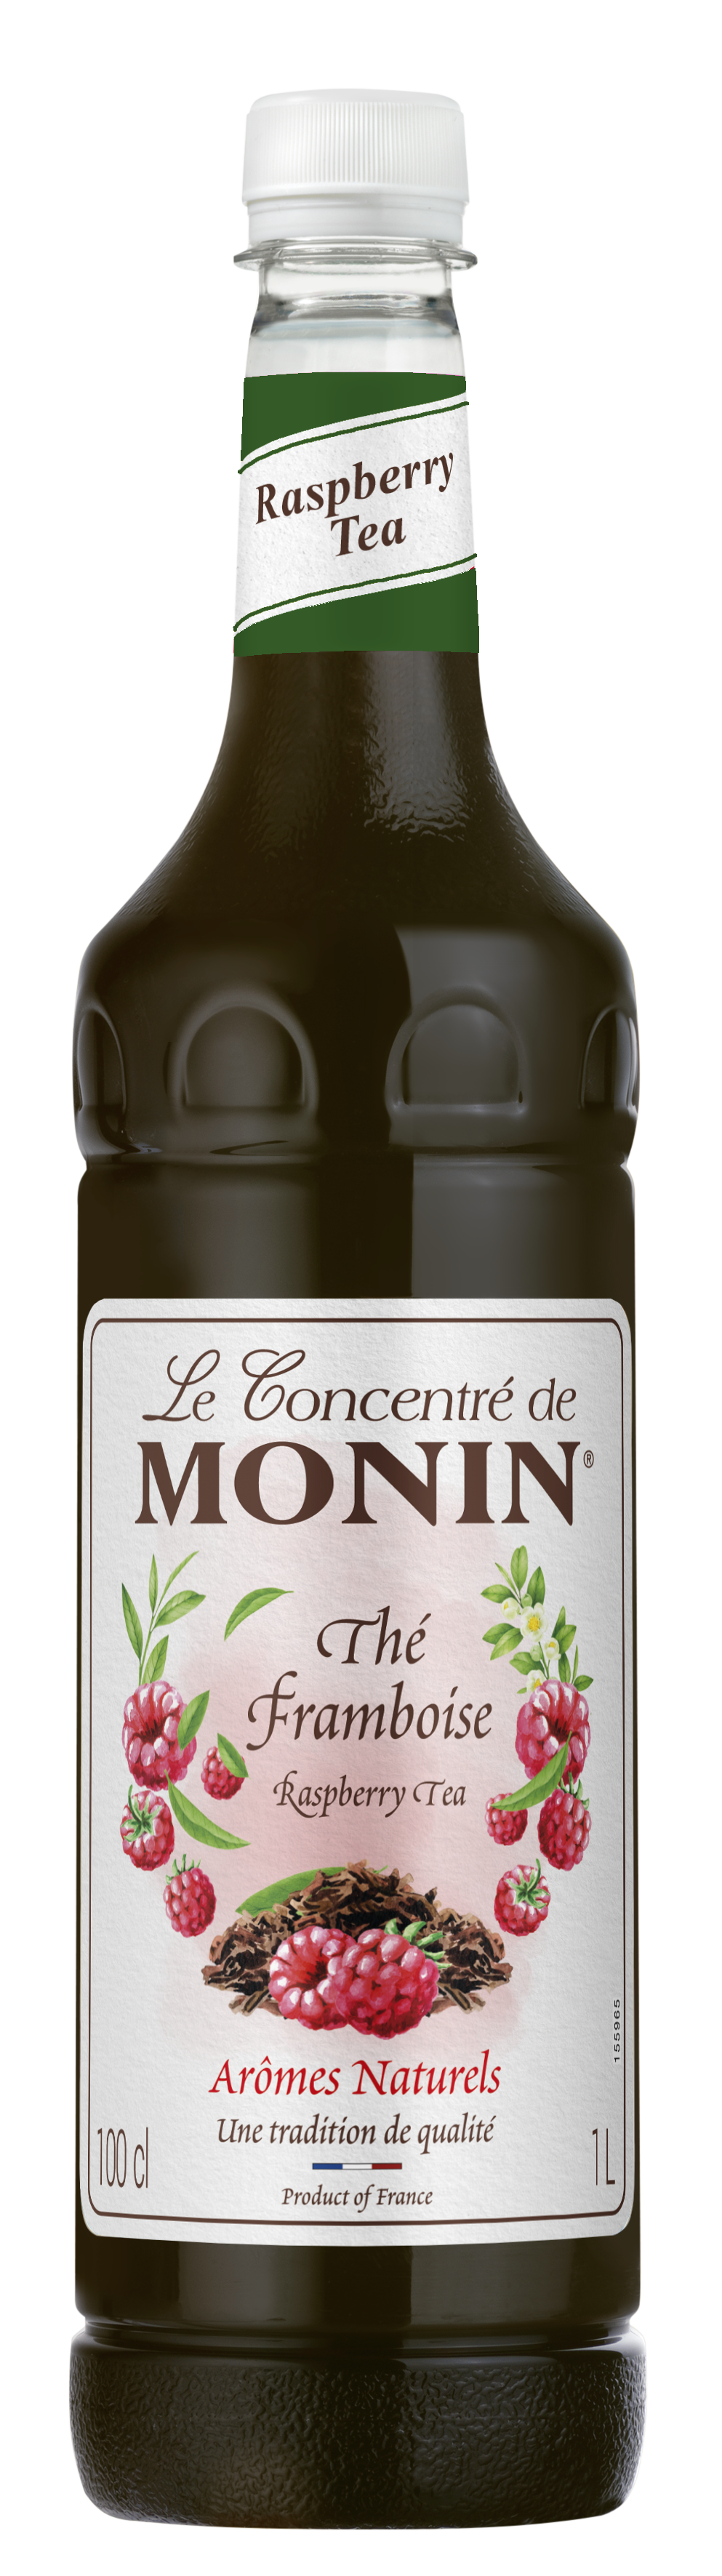 Buy MONIN Raspberry Tea Concentrate. It is made using only natural ingredients, resulting in a mouthwatering & aromatic flavour.